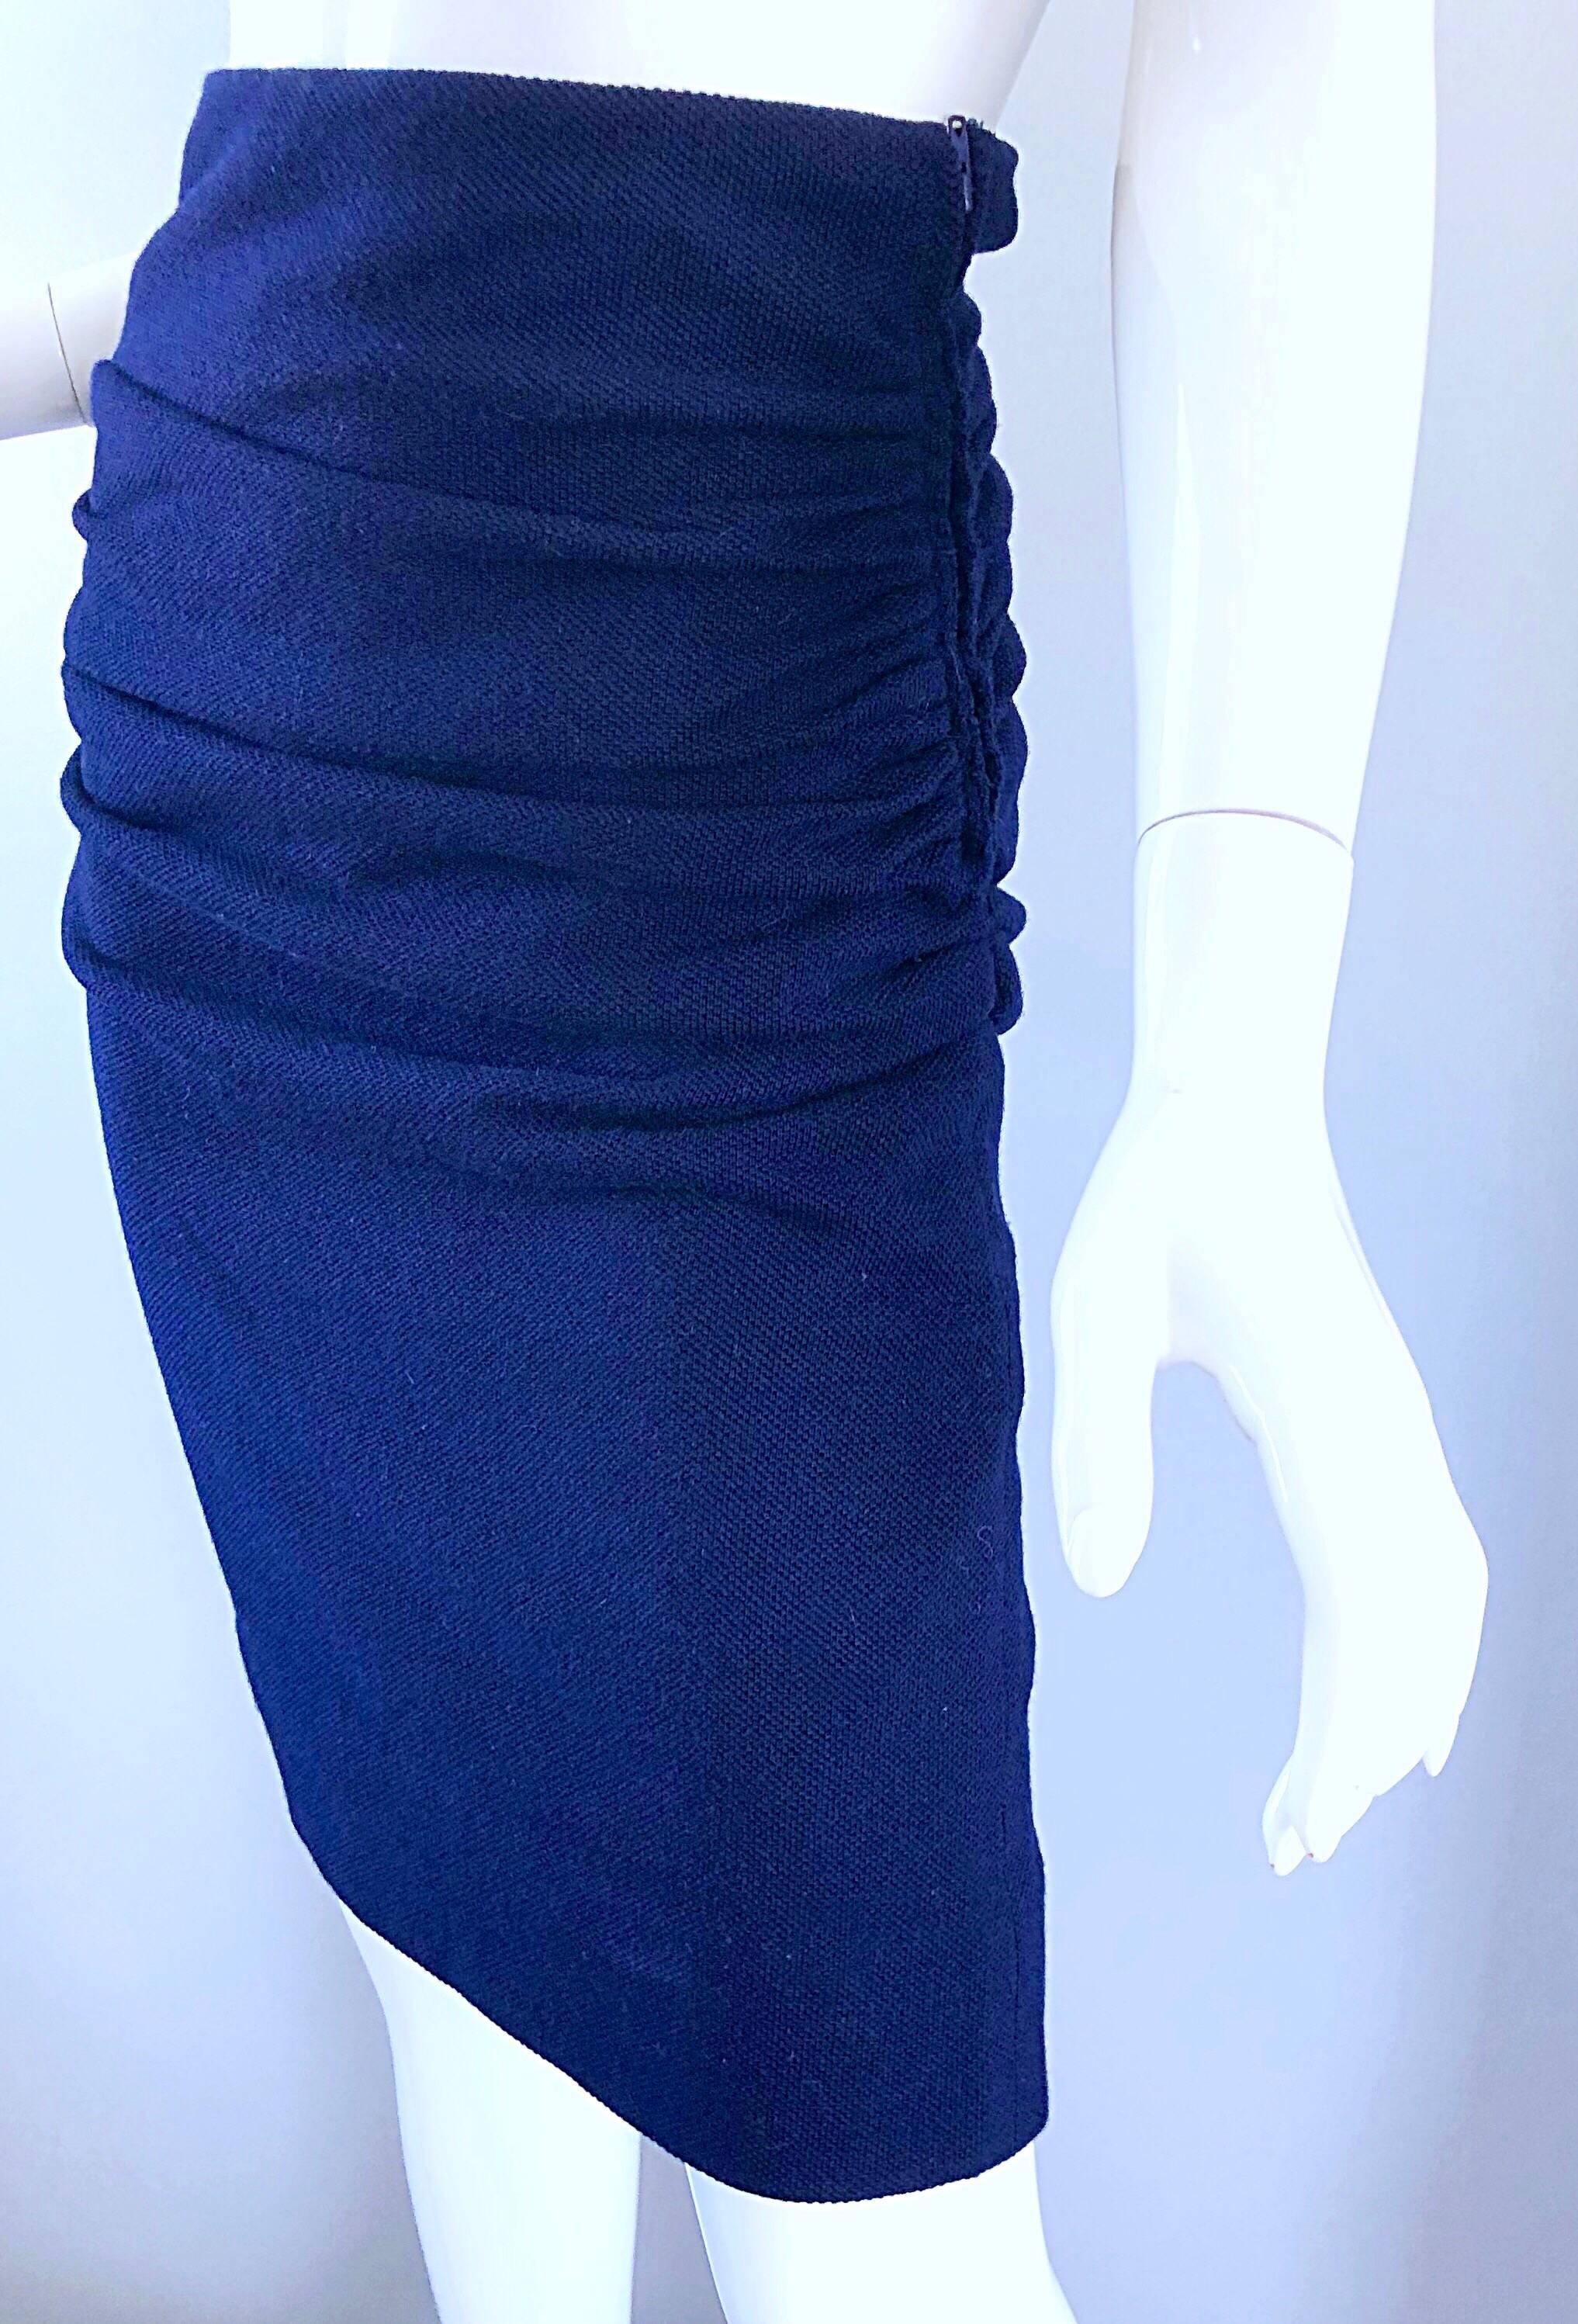 1990s Karl Lagerfeld High Waisted Navy Blue Wool Ruched 90s VIntage Pencil Skirt For Sale 2